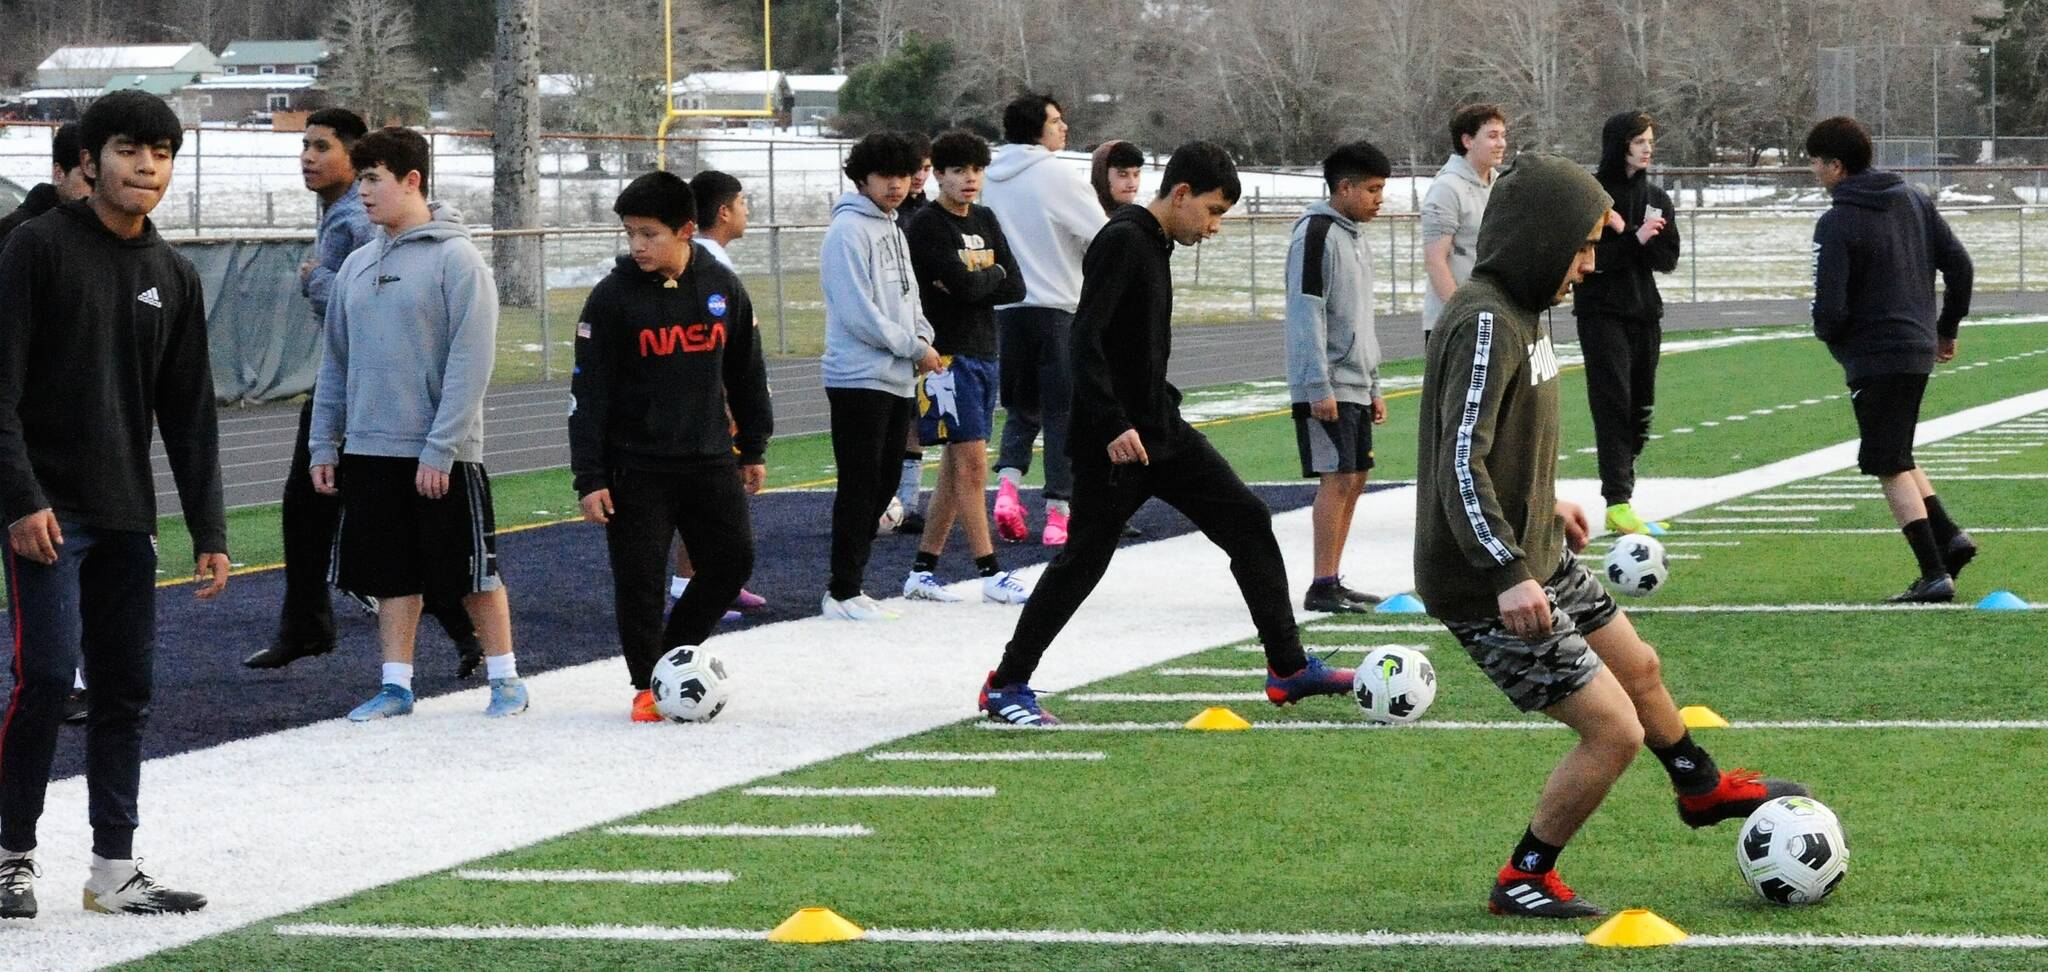 Even with very cool temperatures at Spartan Stadium, 30 Forks high school athletes were getting a real kick out of soccer as they prepared for the upcoming season. Photo by Lonnie Archibald